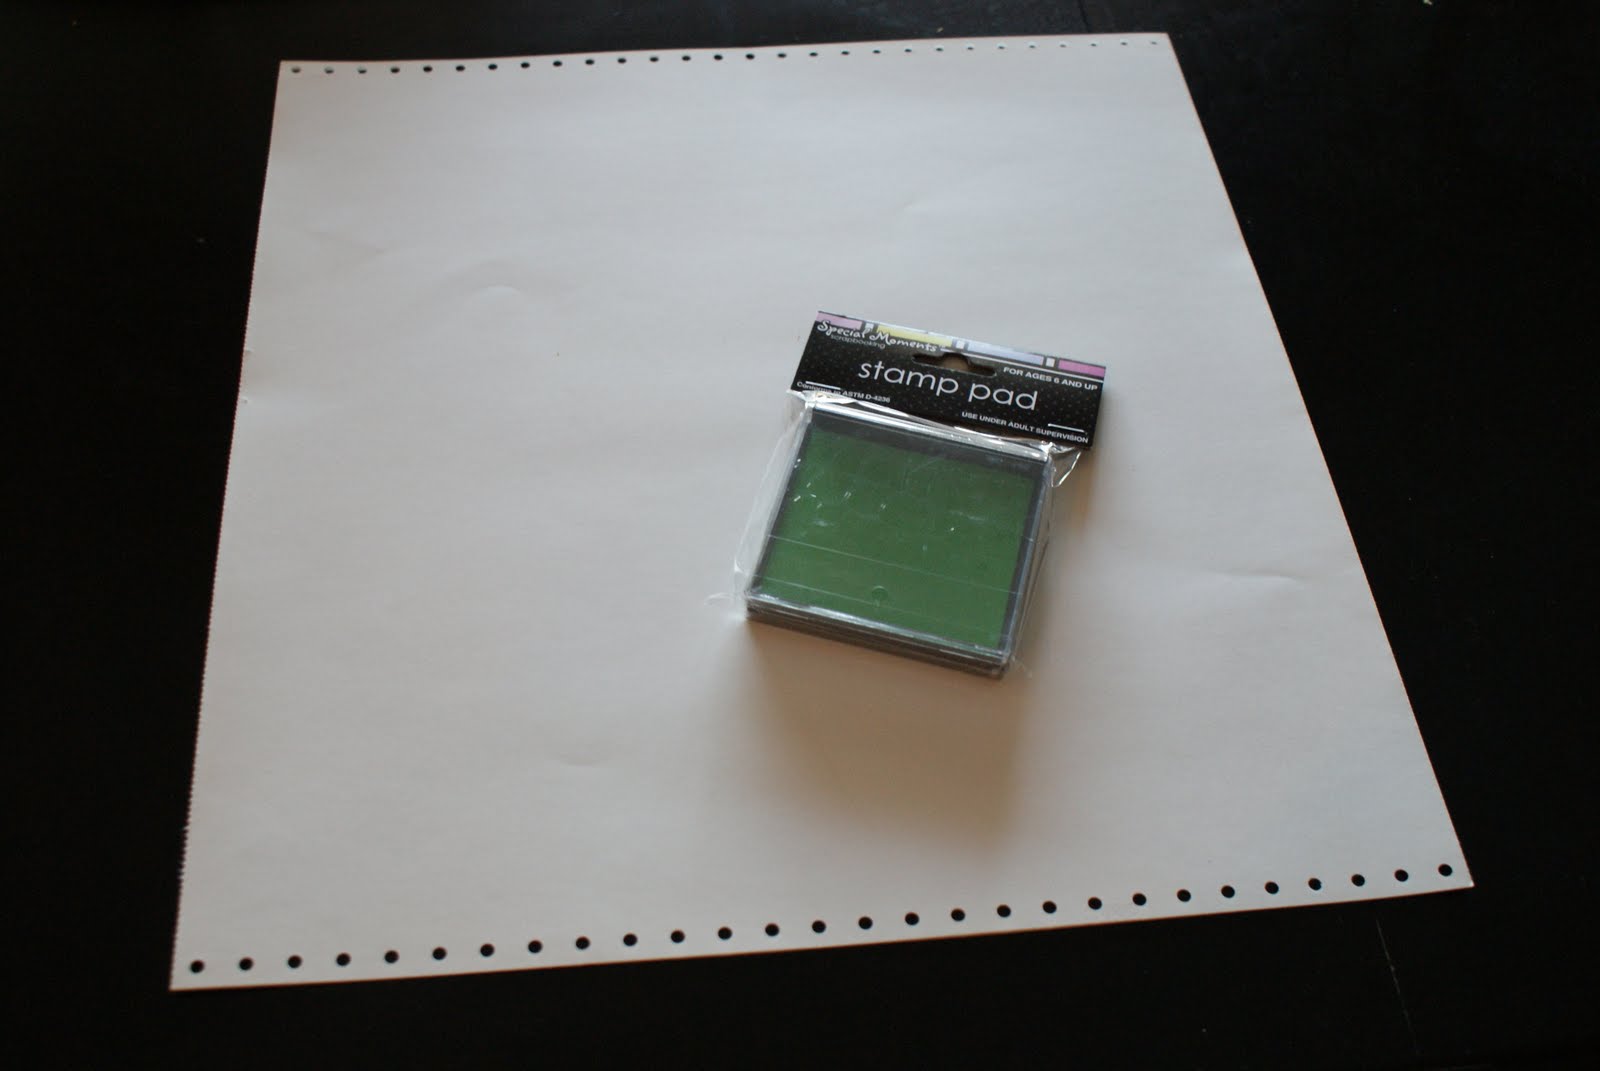 Remember When Computer Printers Printed on That Paper That Had Perforated Edges With Holes? |